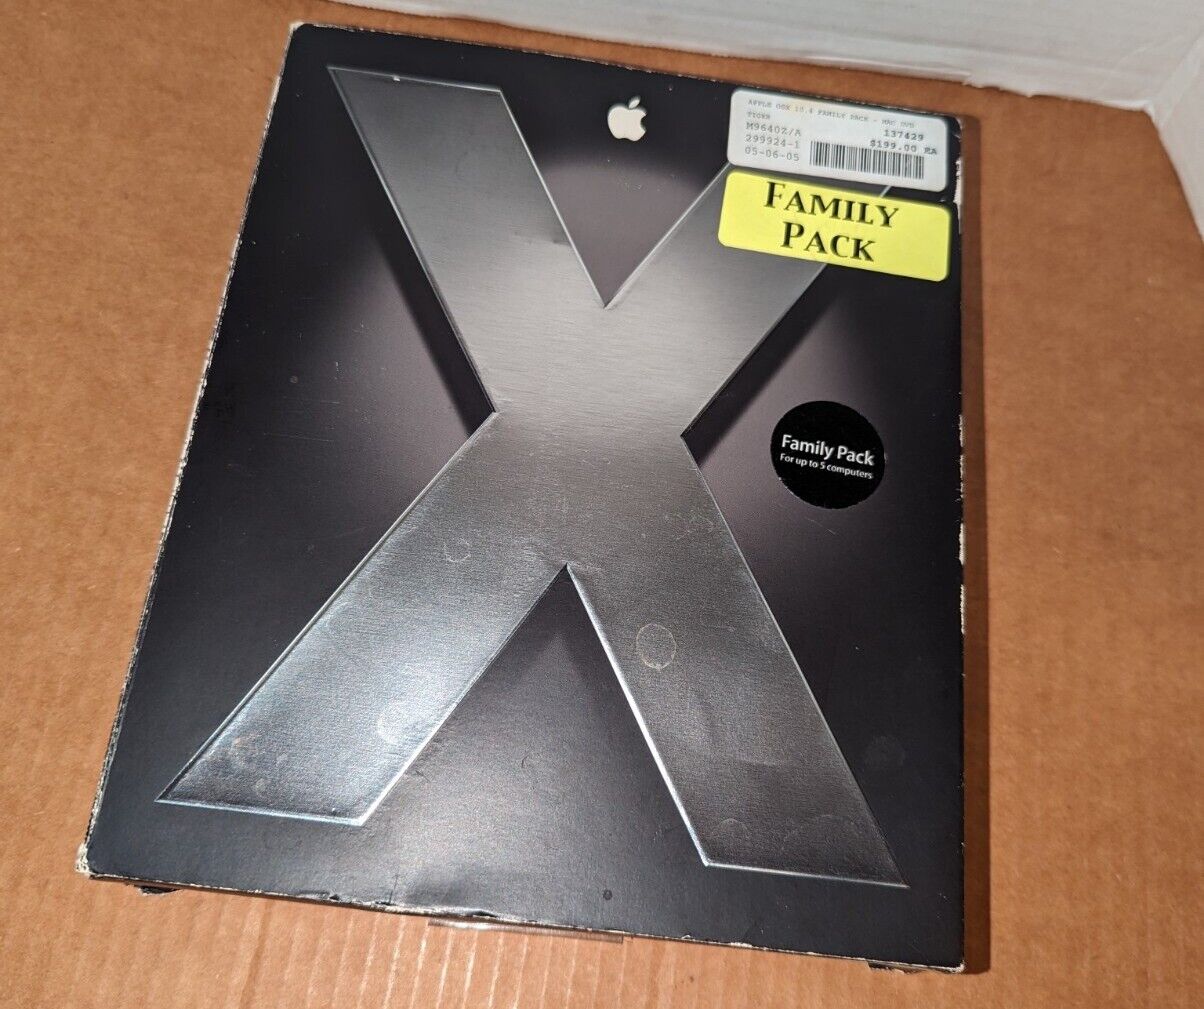 Apple OS X Tiger 10.4 Retail Box - Used, Open Box, Install DVD, OSX